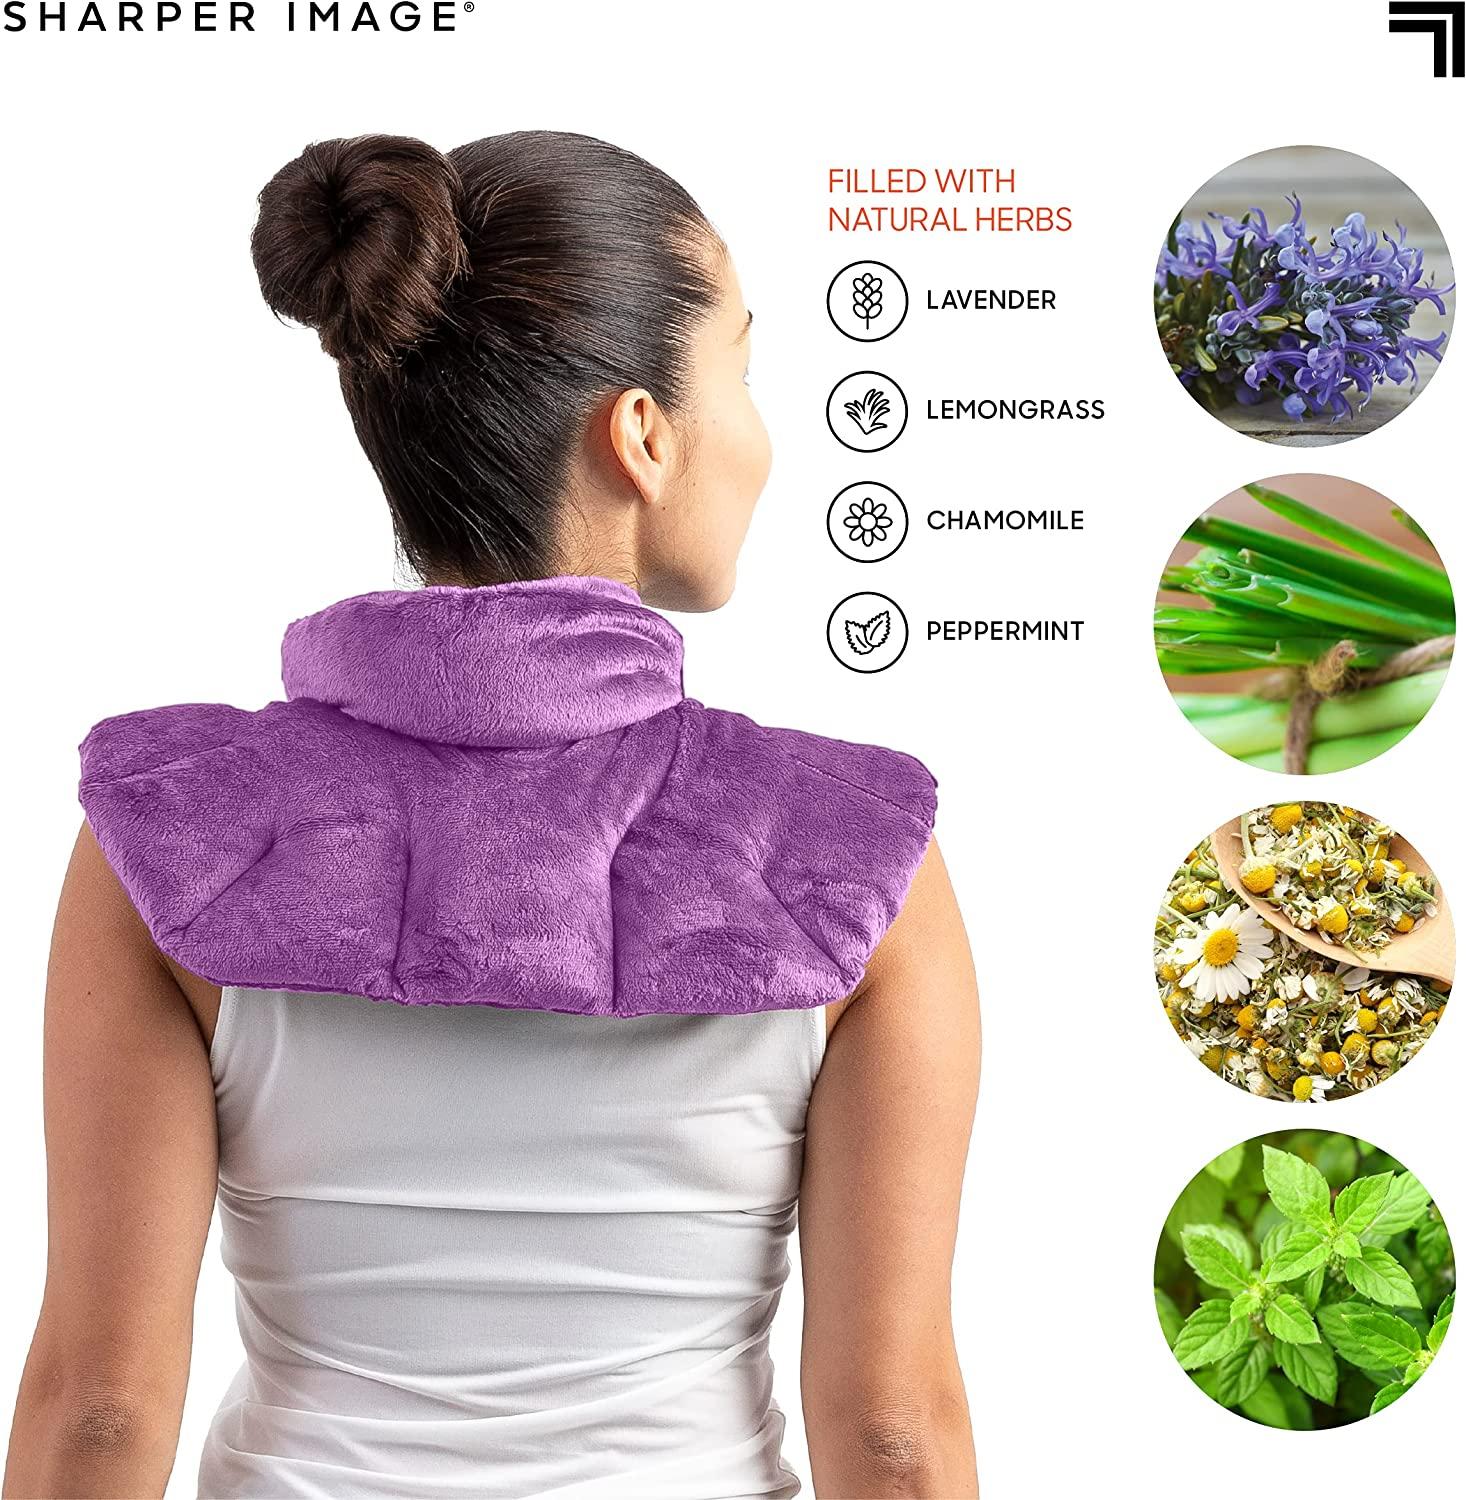 Sharper Image Heated Neck and Shoulder Aromatherapy Wrap